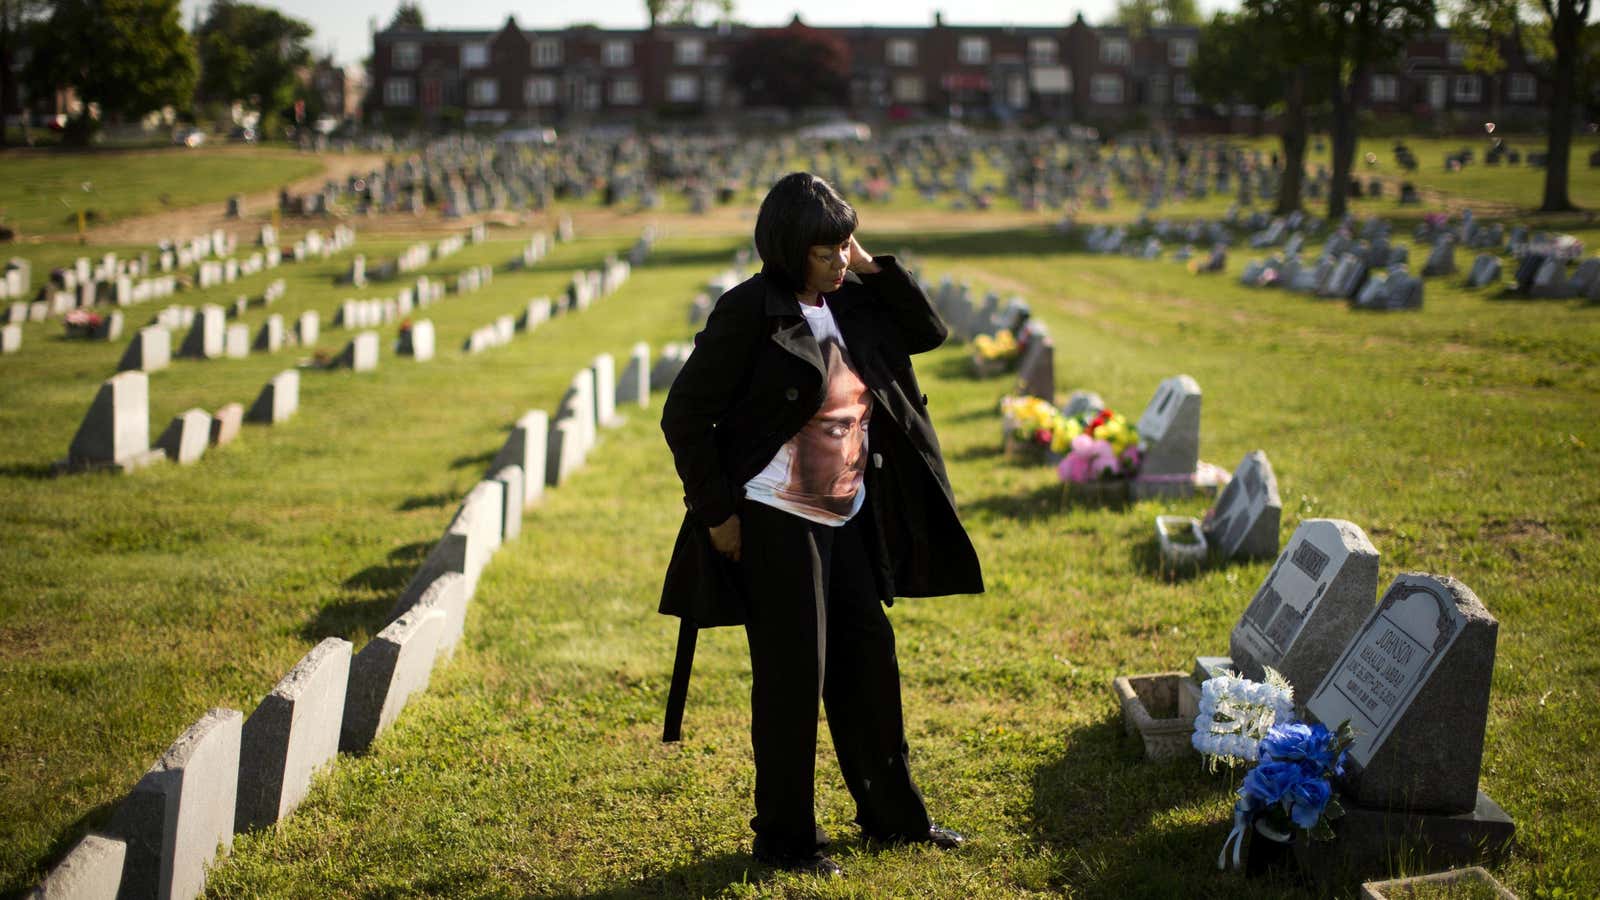 Dorothy Johnson-Speight visits the grave of her son, Khaaliq Jabbar Johnson, in Philadelphia in May. Johnson was killed in 2001 – shot seven times over a parking space dispute. Almost every single American—99.85%—will know at least one victim of gun violence during his or her lifetime, a recent analysis in the journal Preventive Medicine estimates.